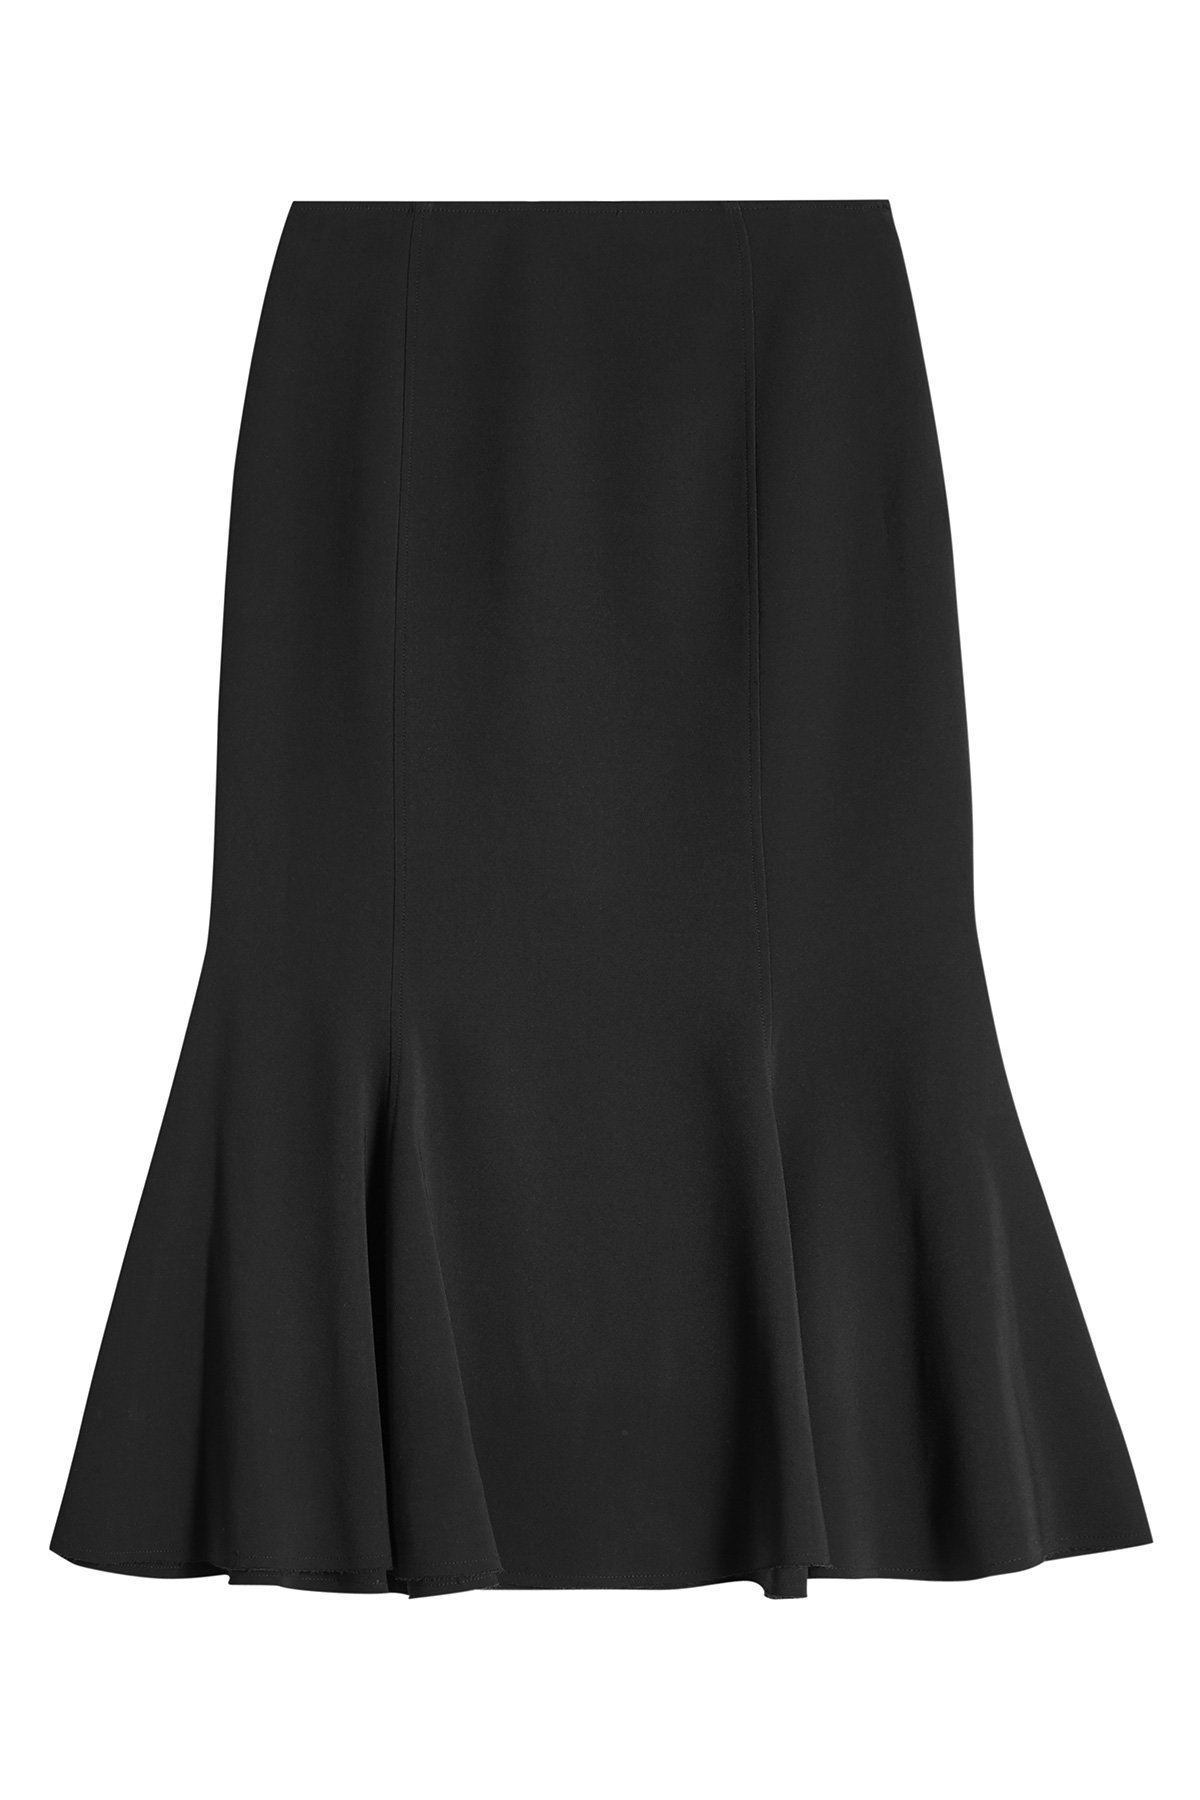 Fluted Crepe Skirt by Proenza Schouler